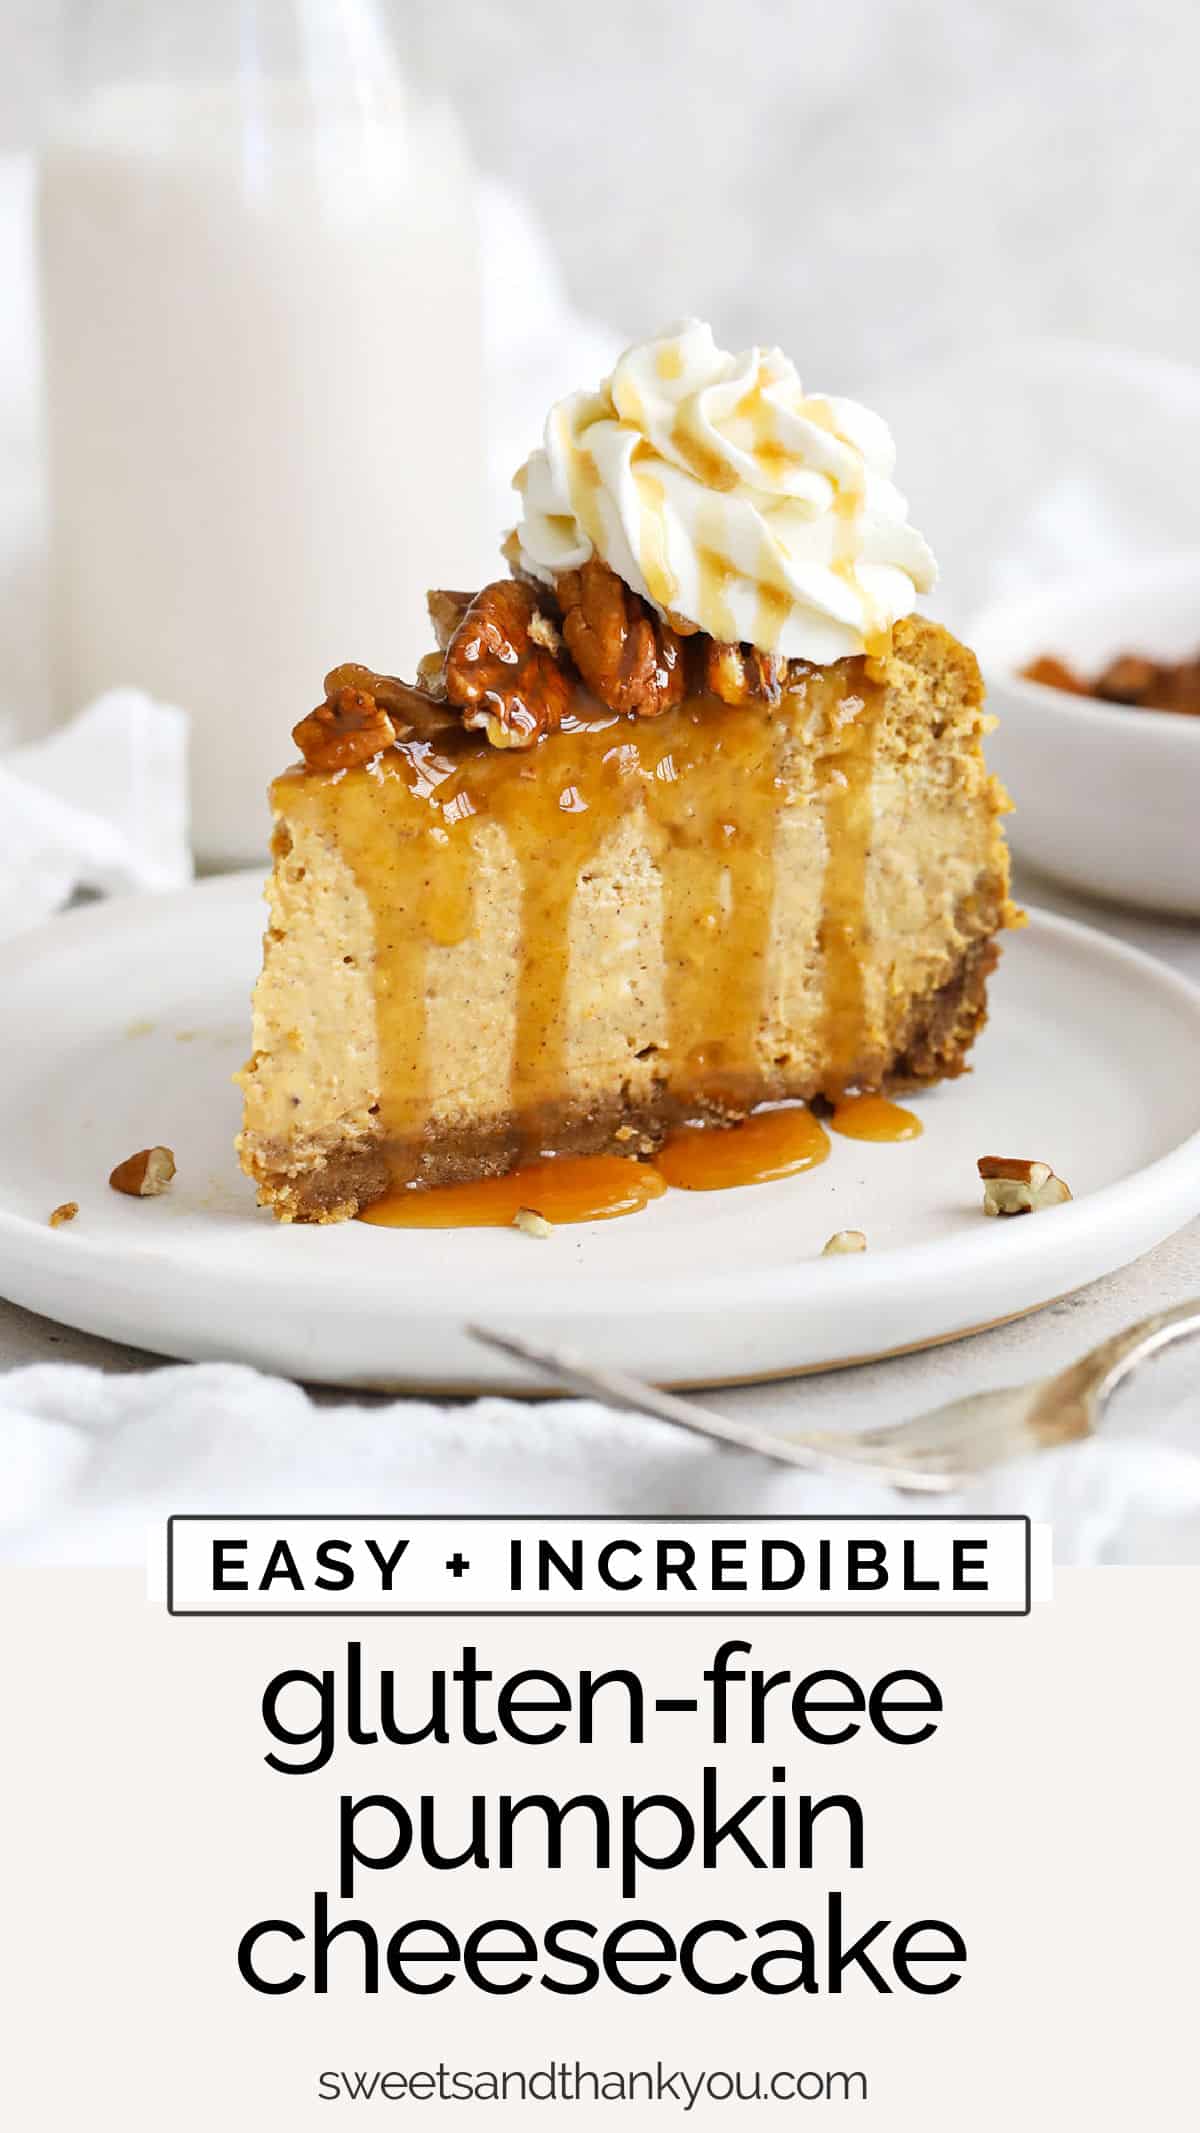 Gluten-Free Pumpkin Cheesecake - This easy gluten-free cheesecake recipe is perfect for pumpkin season! Try it at Thanksgiving or Christmas as a fun alternative to pie. / gluten free pumpkin cheesecake recipe / gluten free pumpkin dessert / gluten free thanksgiving dessert // gluten free Christmas dessert // gluten free pumpkin recipe / gluten free cheesecake crust // gluten free cheesecake filling / gluten-free pumpkin caramel cheesecake / gluten-free pumpkin pecan cheesecake